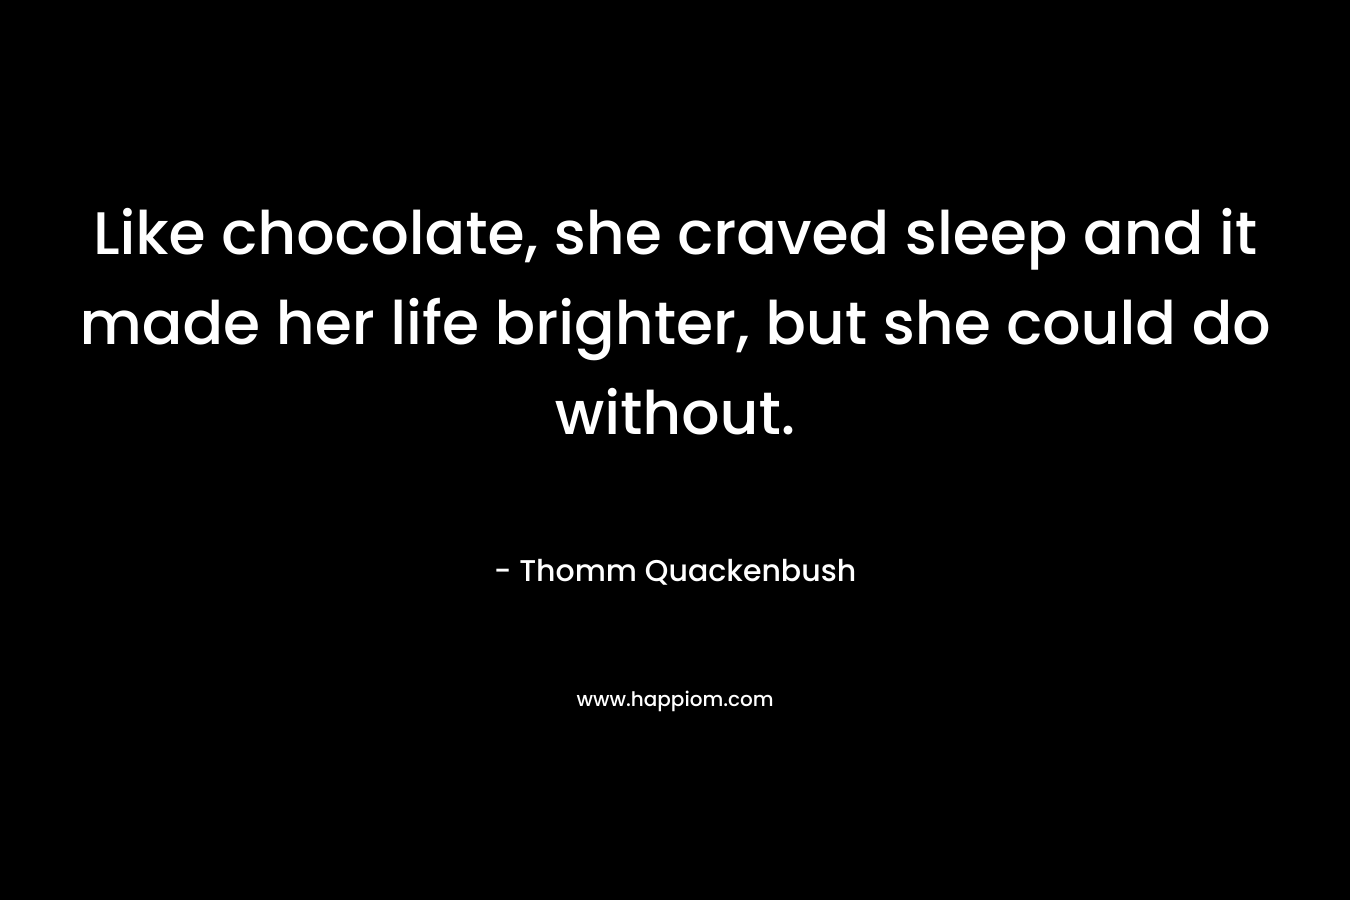 Like chocolate, she craved sleep and it made her life brighter, but she could do without. – Thomm Quackenbush